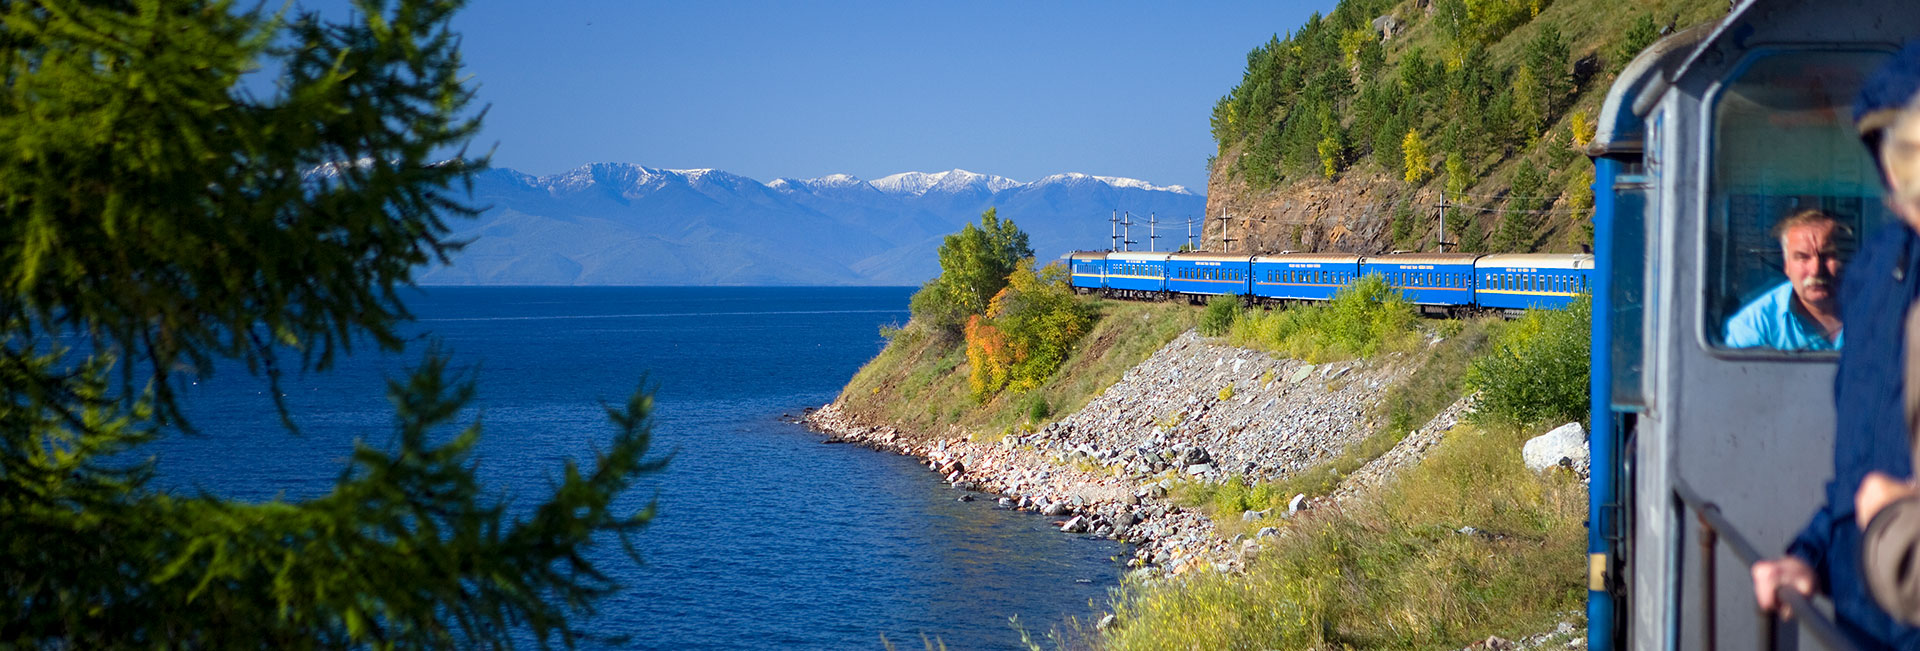 The Trans-Siberian Golden Eagle Express private train traveling around Lake Baikal, Russia